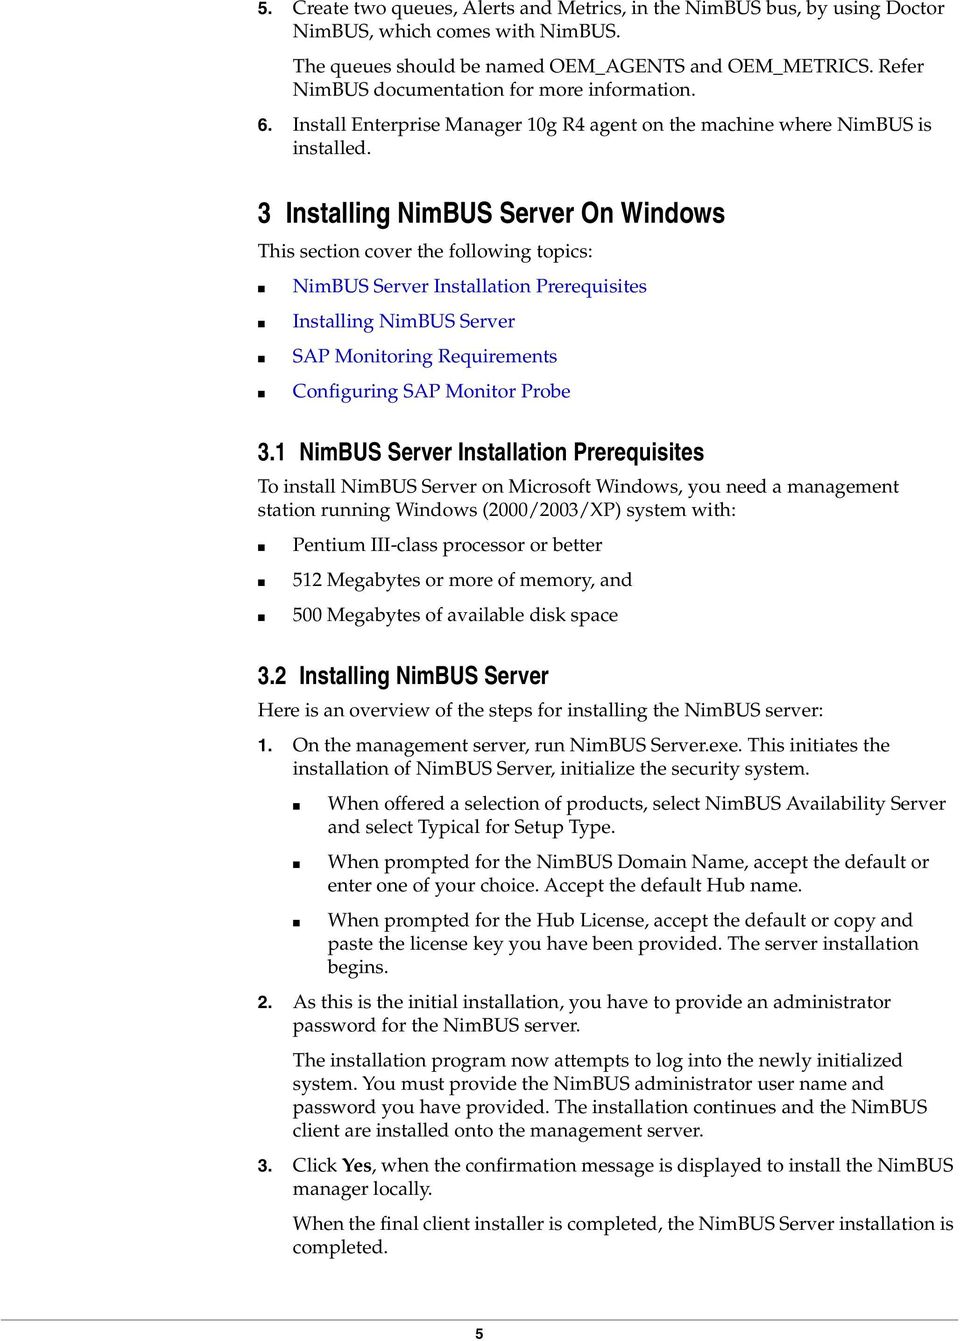 3 Installing NimBUS Server On Windows This section cover the following topics: NimBUS Server Installation Prerequisites Installing NimBUS Server SAP Monitoring Requirements Configuring SAP Monitor